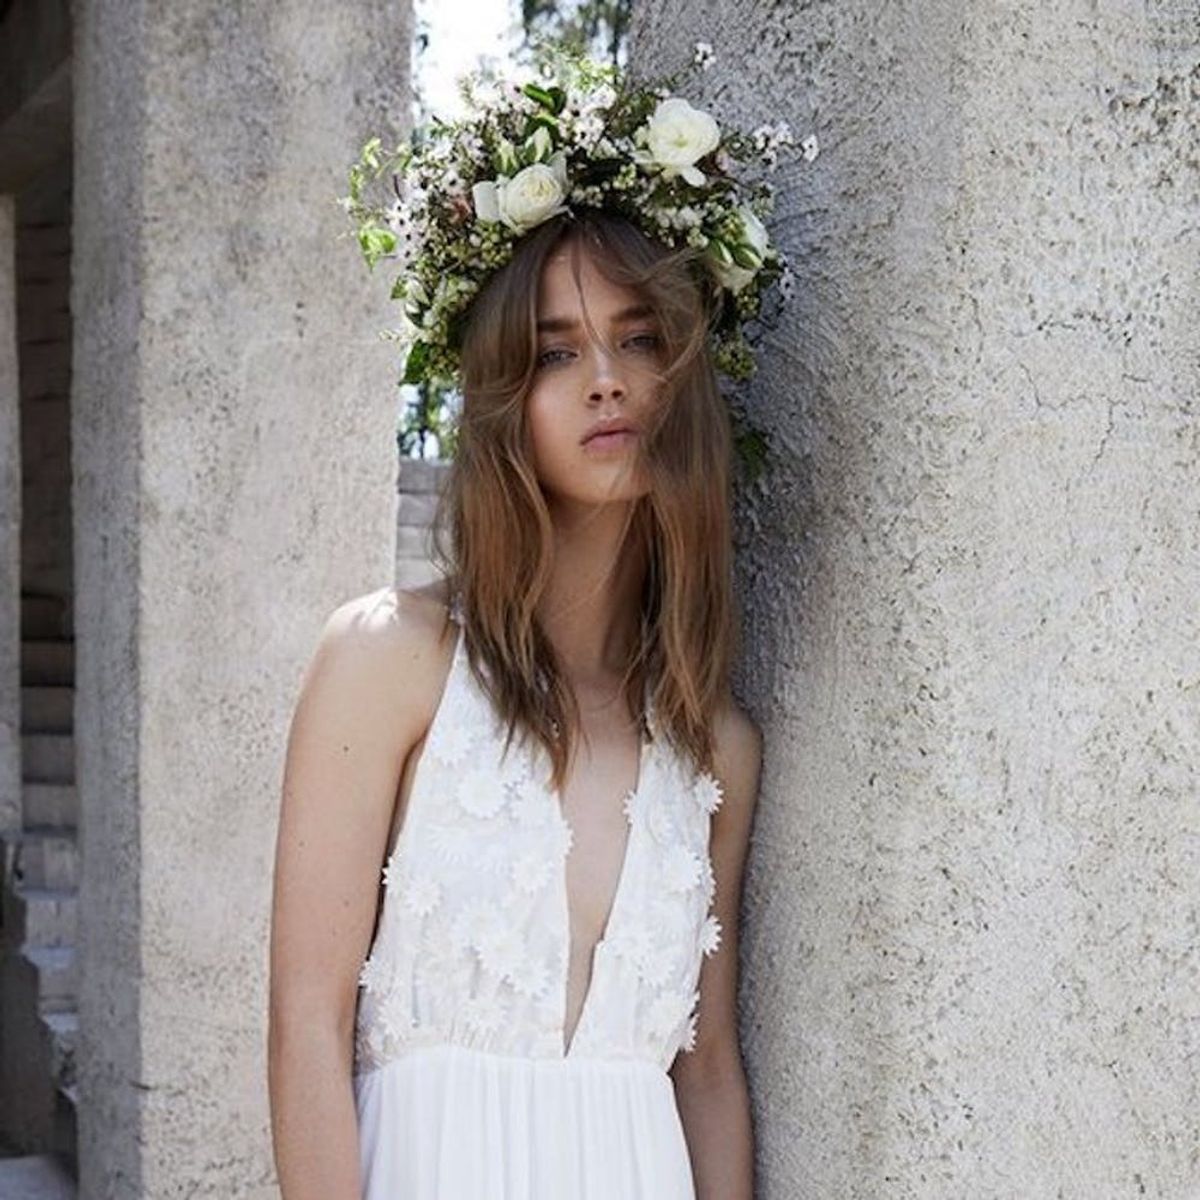 For Love & Lemons Just Released the Affordable Boho Bridal Line of Your Dreams